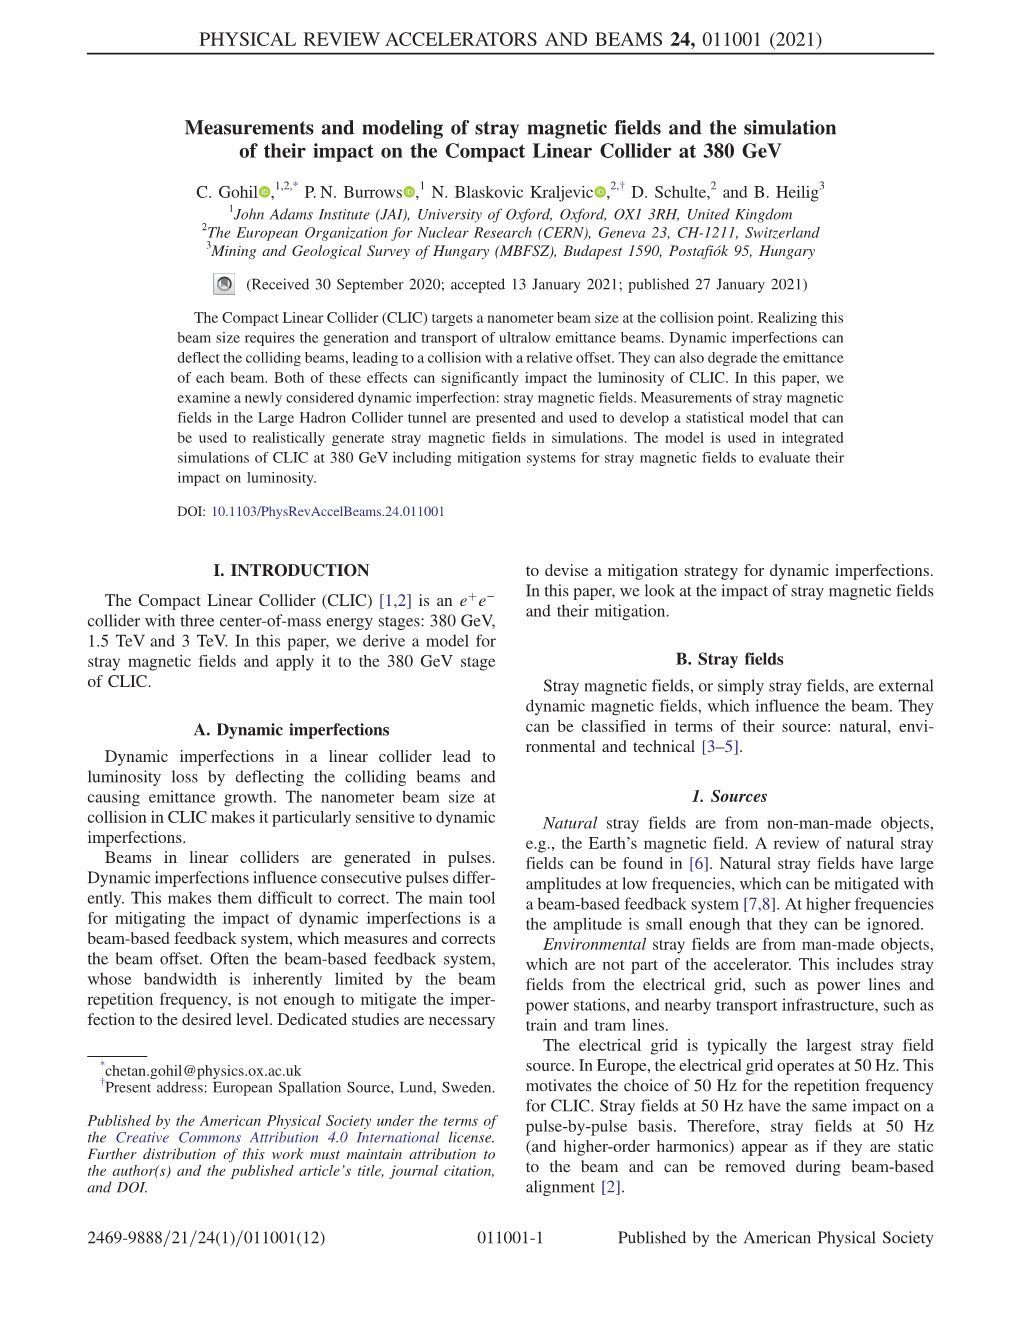 Measurements and Modeling of Stray Magnetic Fields and the Simulation of Their Impact on the Compact Linear Collider at 380 Gev